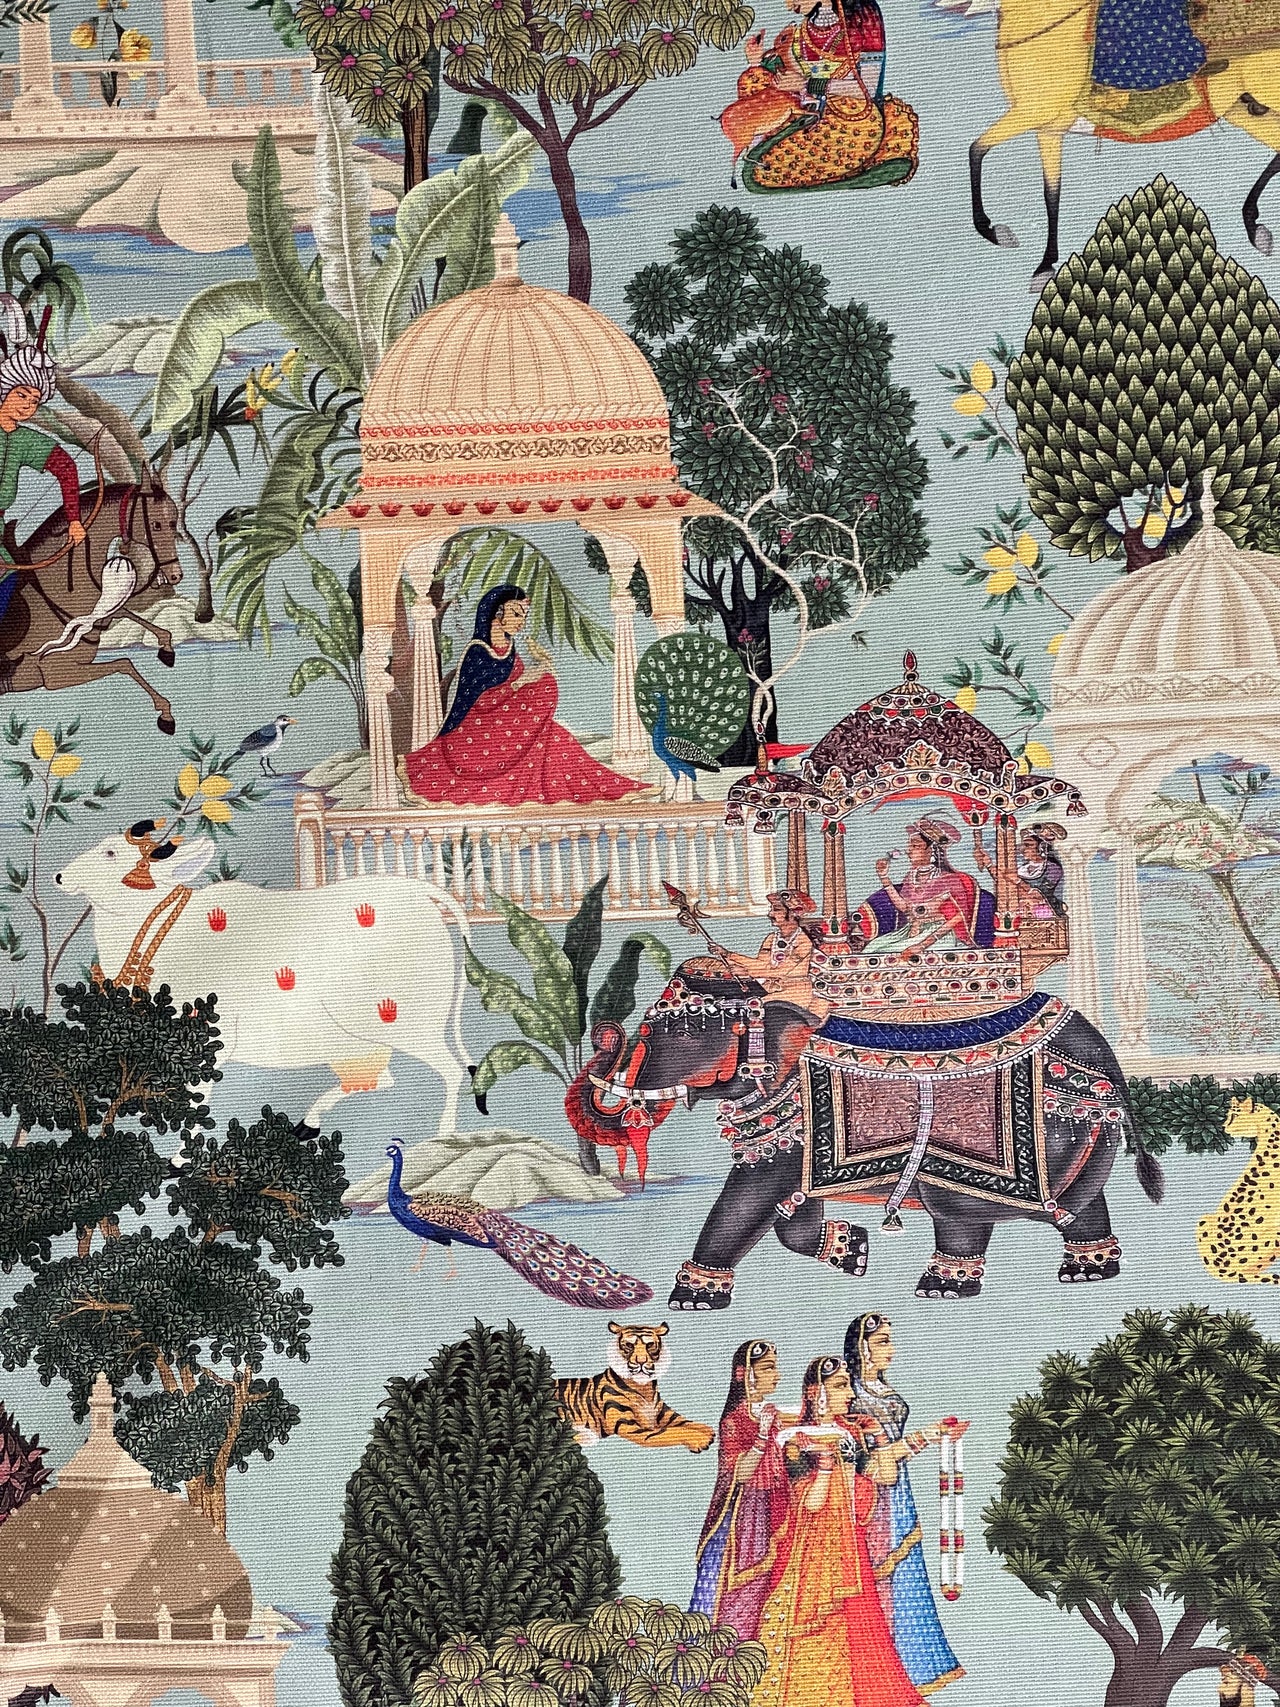 Custom-Made to Measure Roman Blinds - Regalia Pattern on Duck Egg Cotton Fabric with Elephants, Horse, Pagodas, and Trees